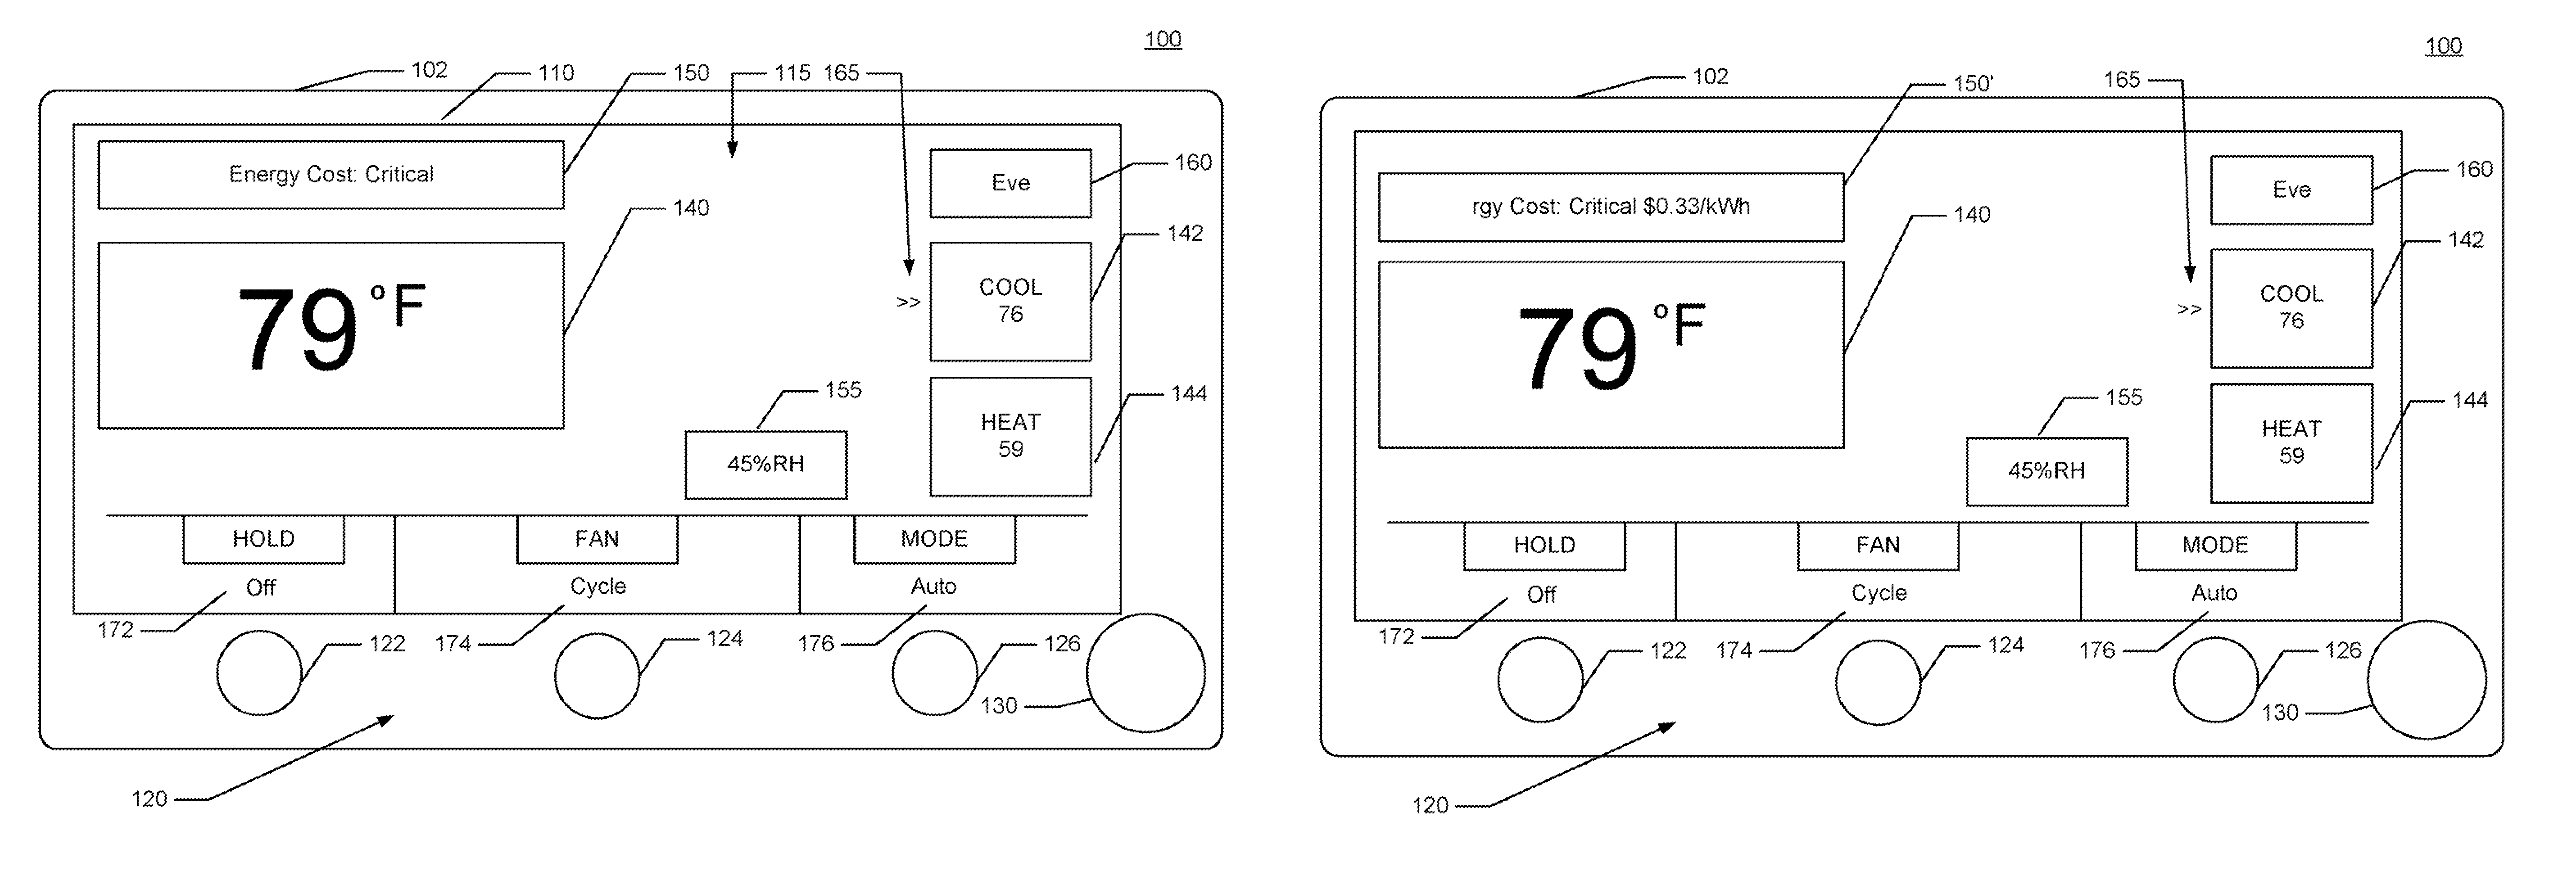 Intelligent thermostat device with automatic adaptable energy conservation based on real-time energy pricing